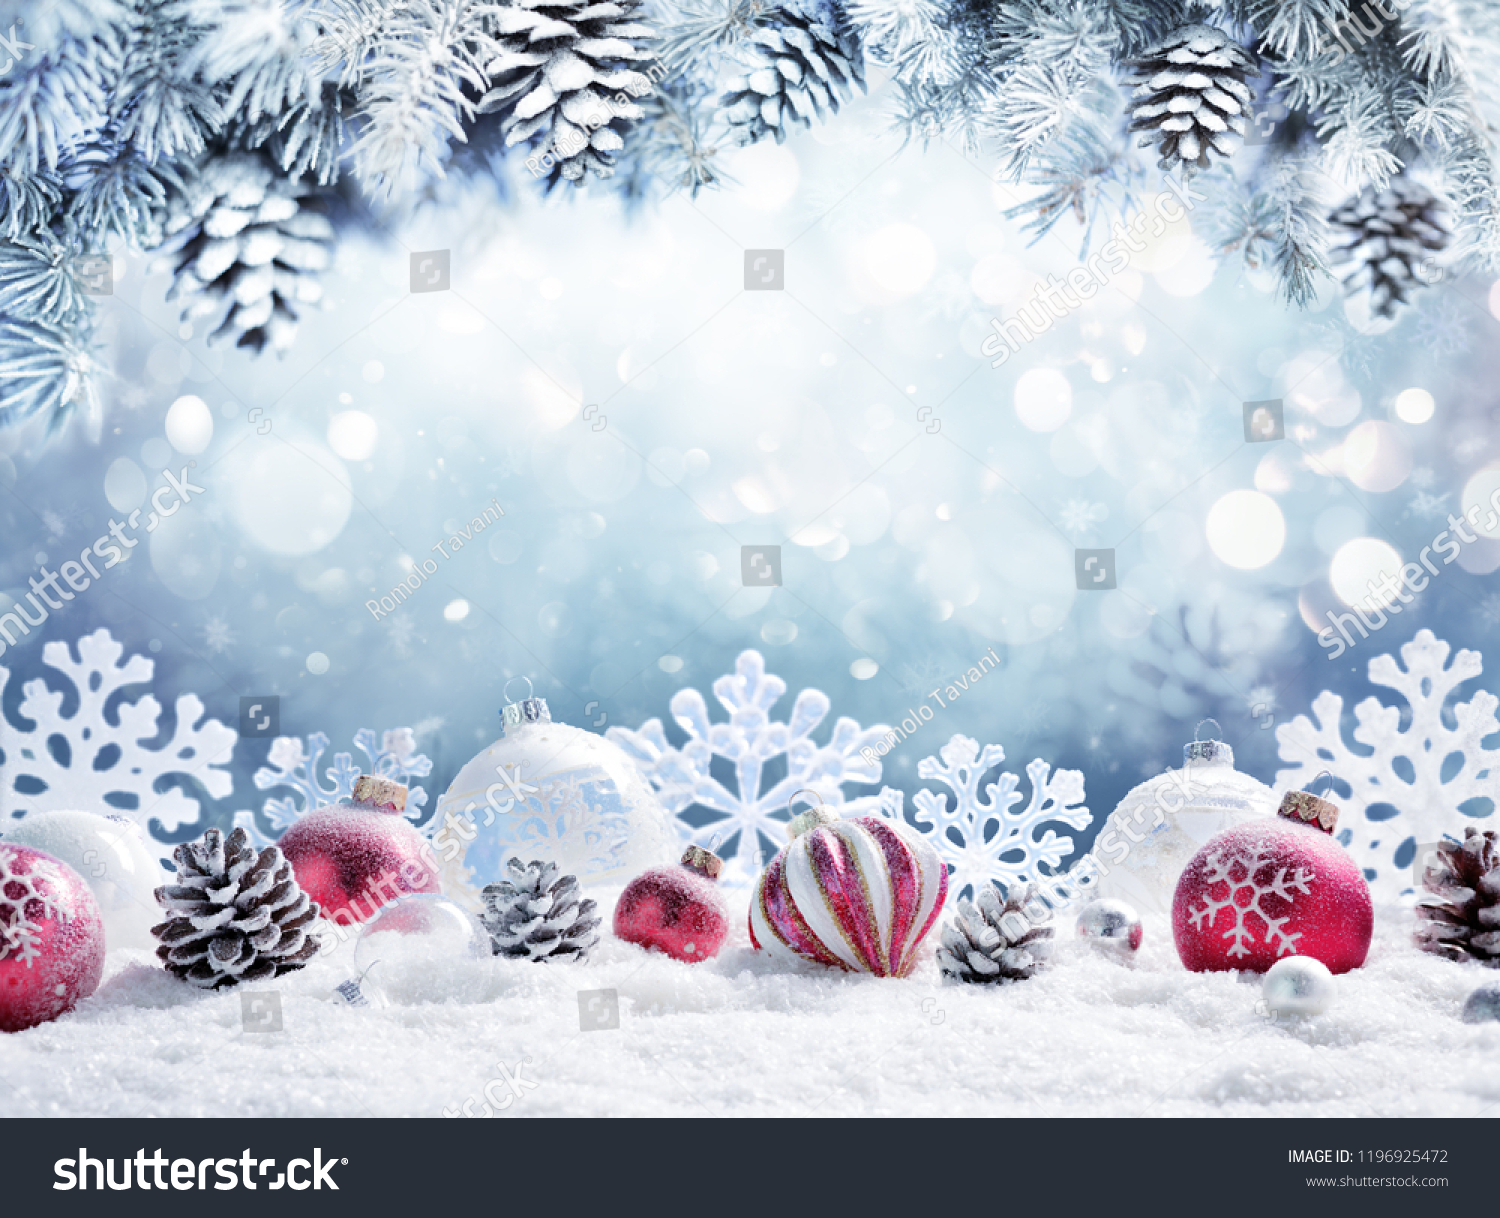 Christmas Card - Baubles On- Snow With Snowy Fir Branches
 #1196925472